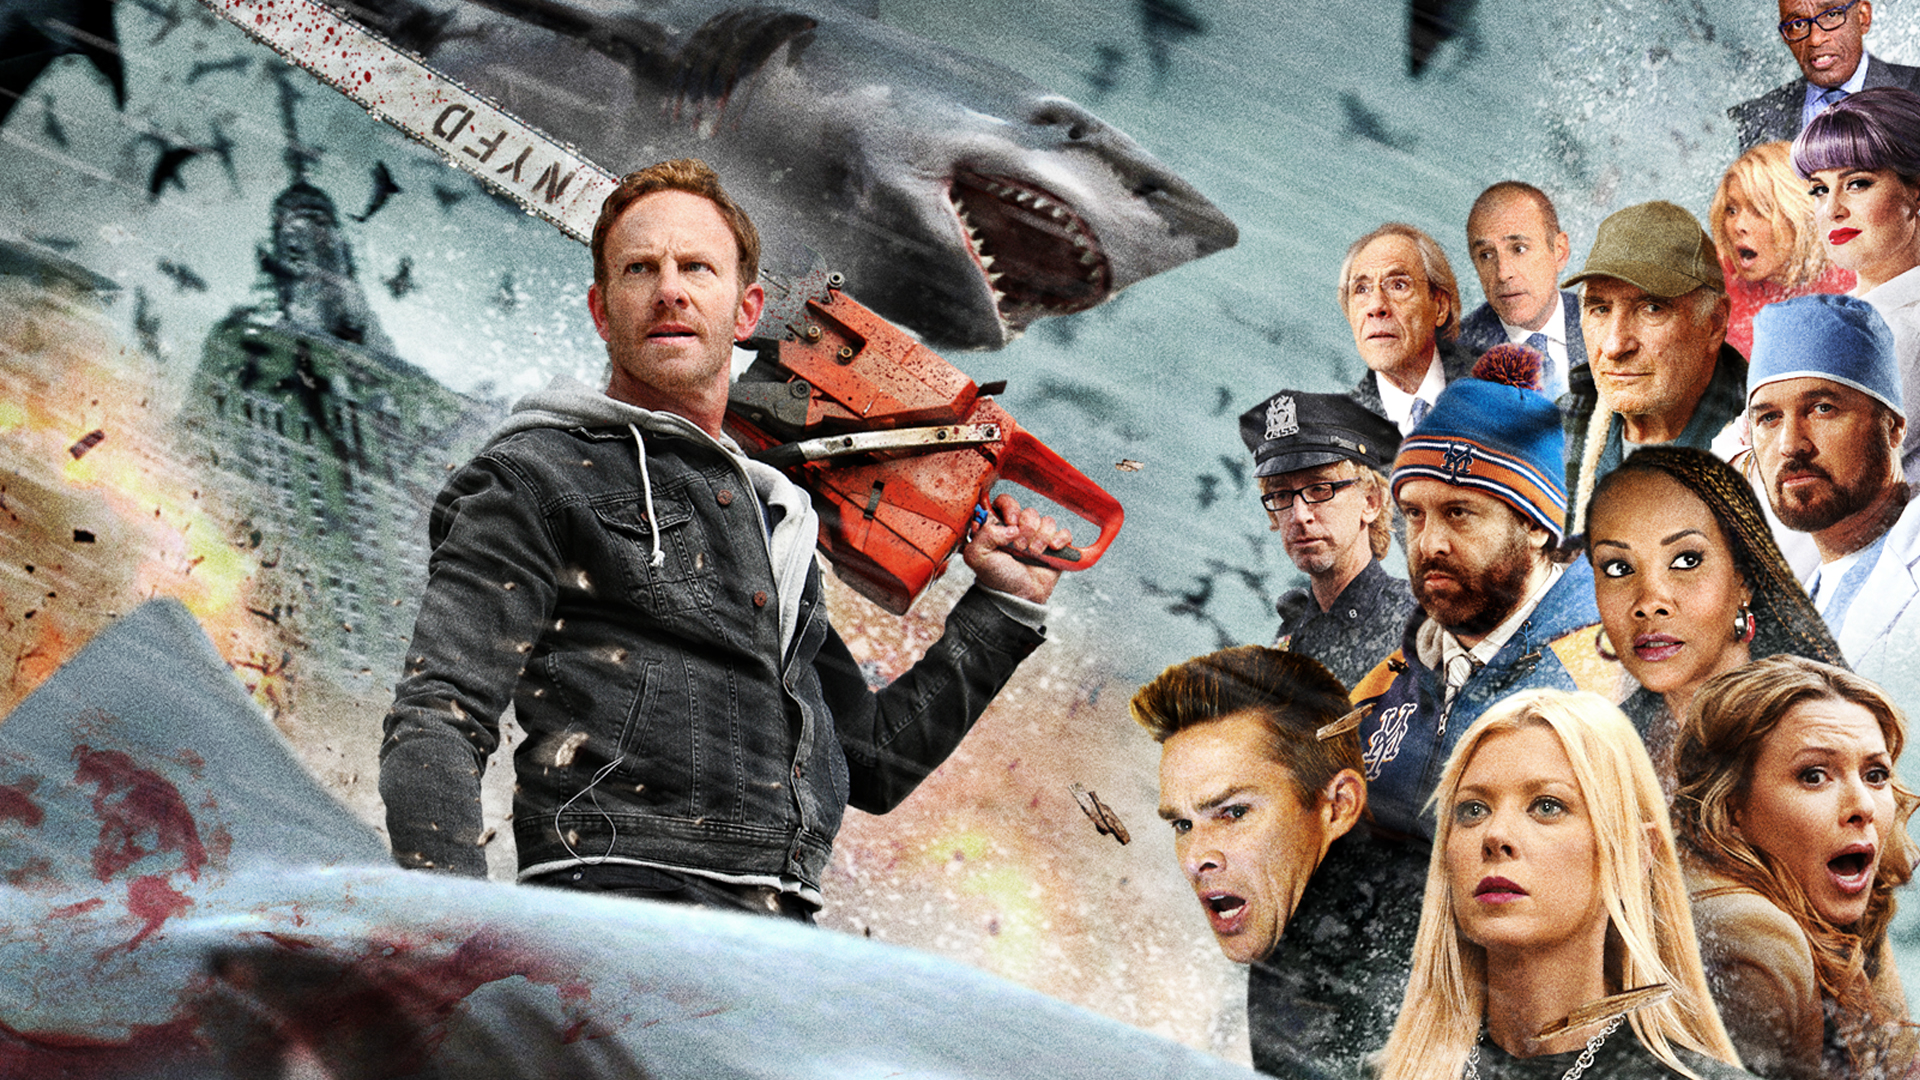 Sharknado 2: The Second One- 2014